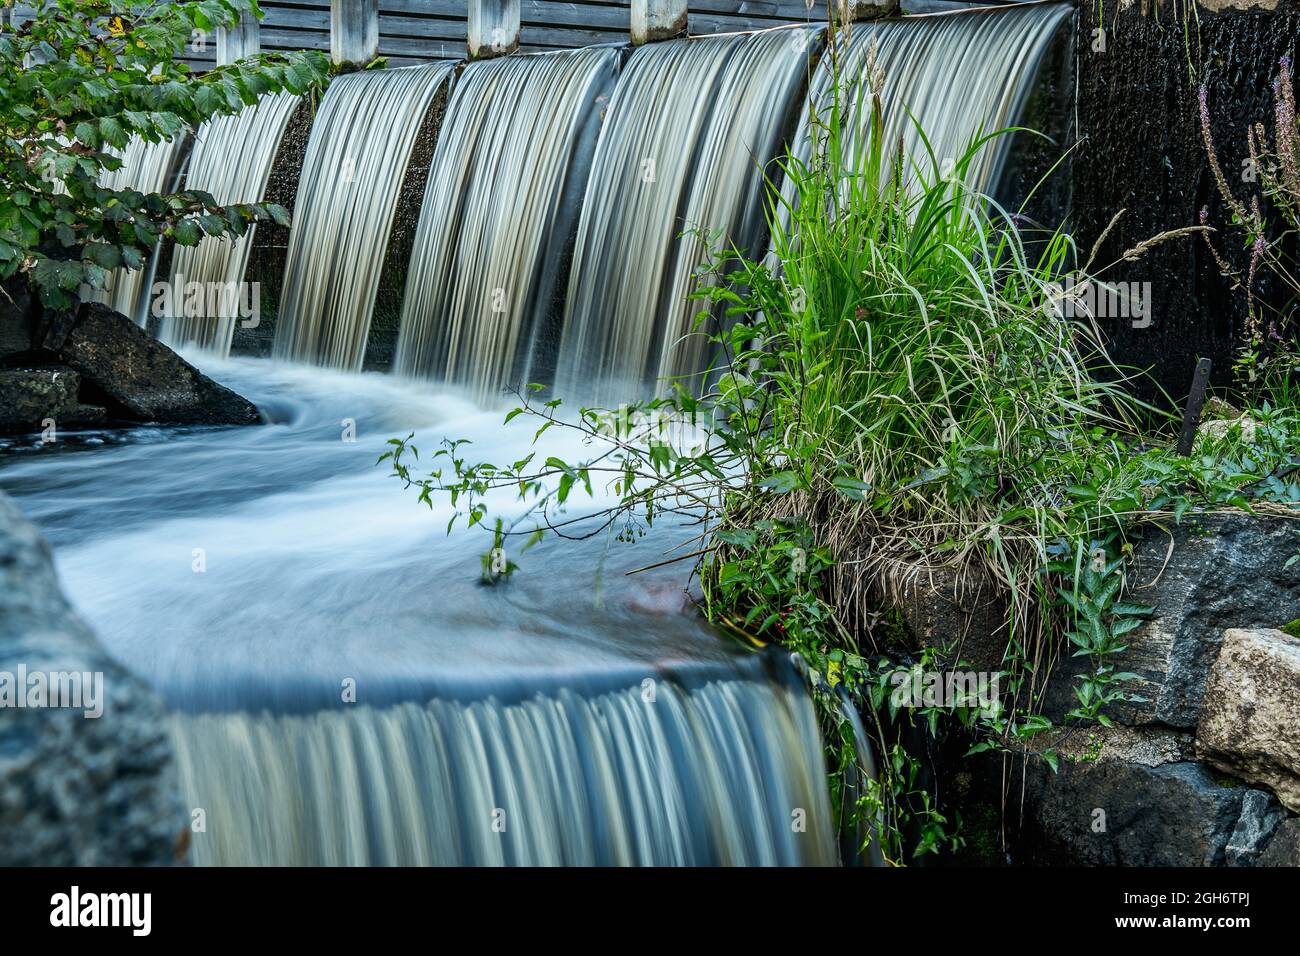 Waterfall from an old watermill located in Forsmark Sweden Stock Photo